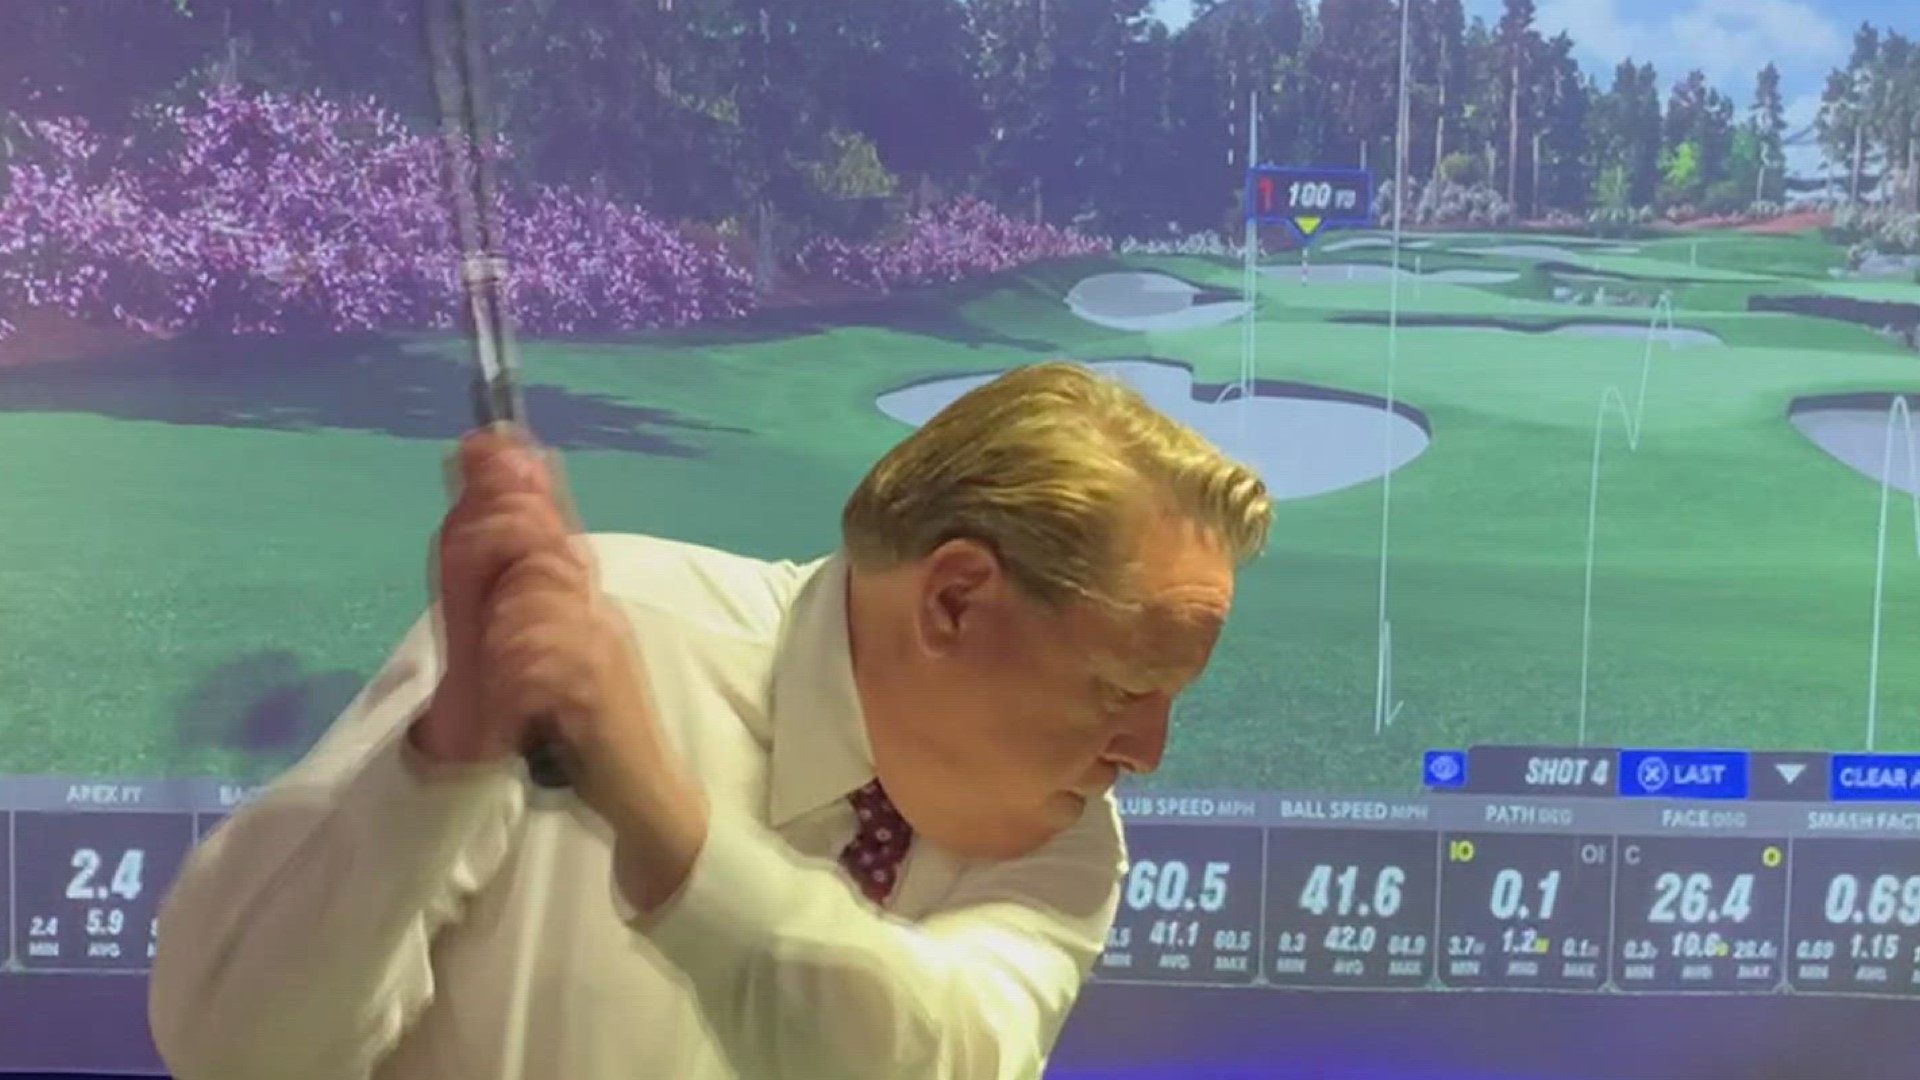 Looks like technology will play a big role in helping local golfers improve their swing.